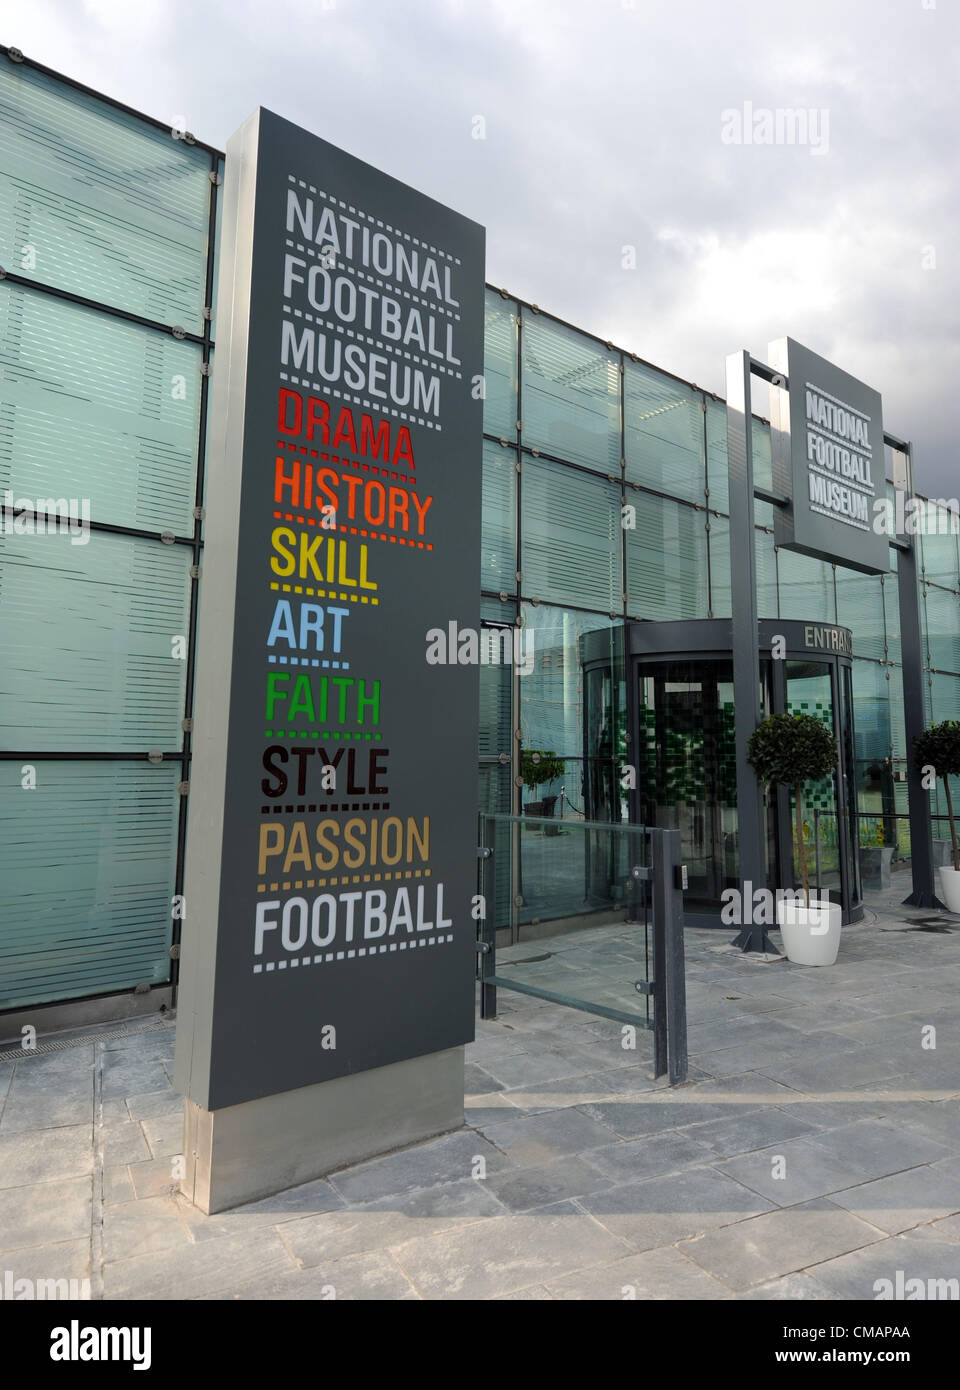 National Football Museum in Manchester, England, UK. Stockfoto